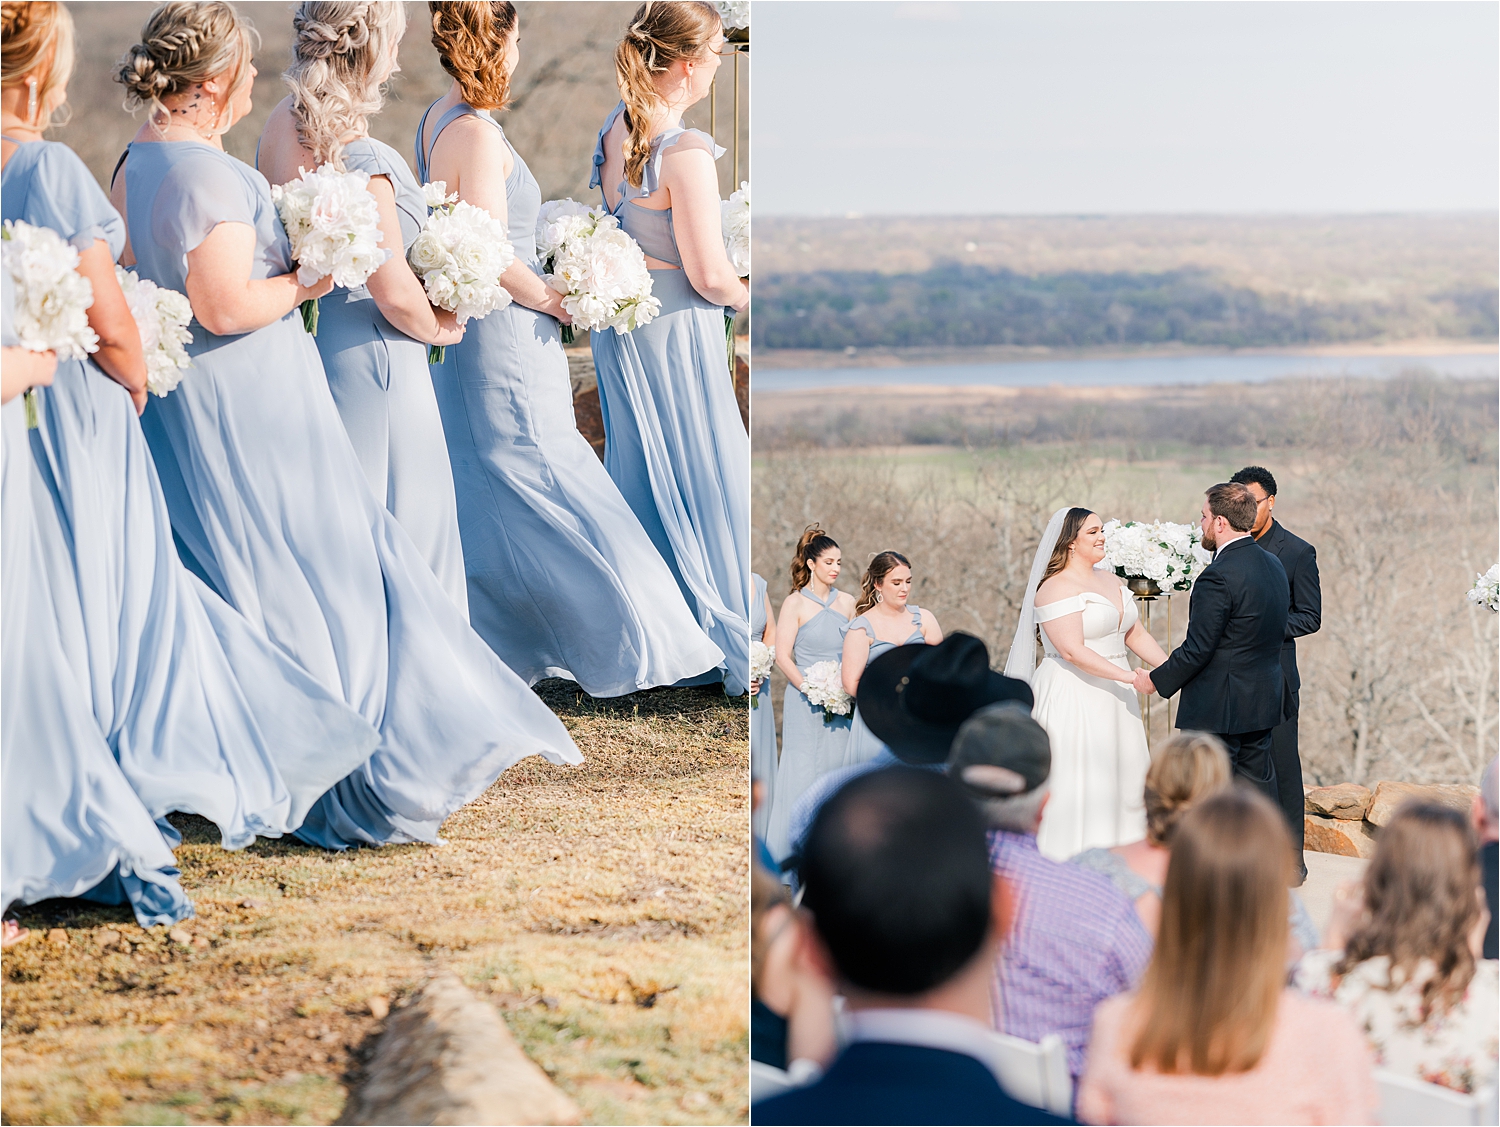 The wedding ceremony at Dream Point Ranch Wedding.